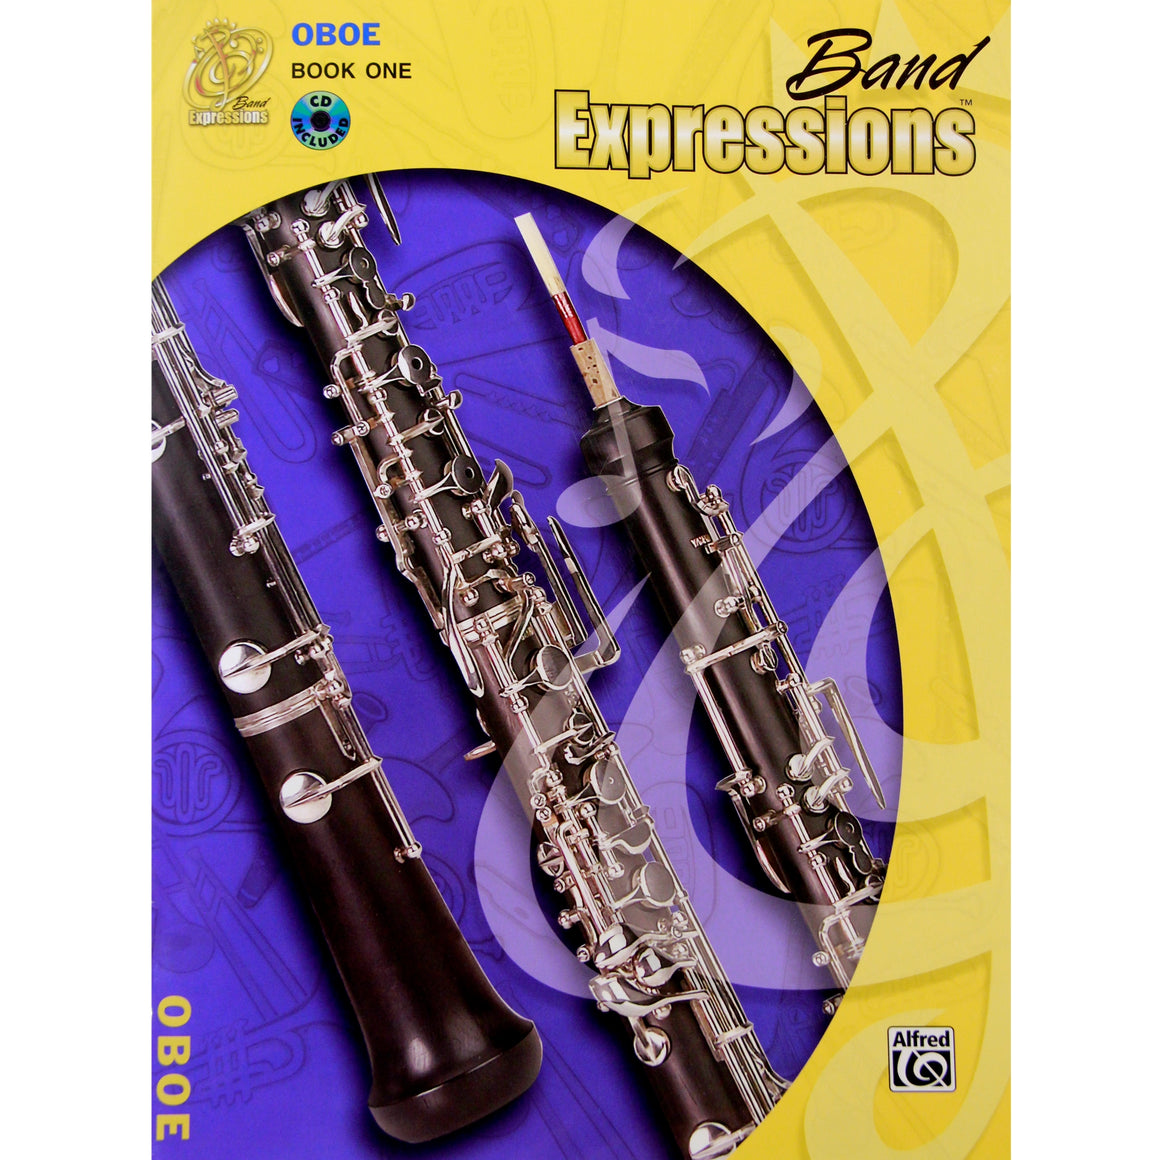 ALFRED 00MCB1003CDX Band Expressions , Book One: Student Edition [Oboe]